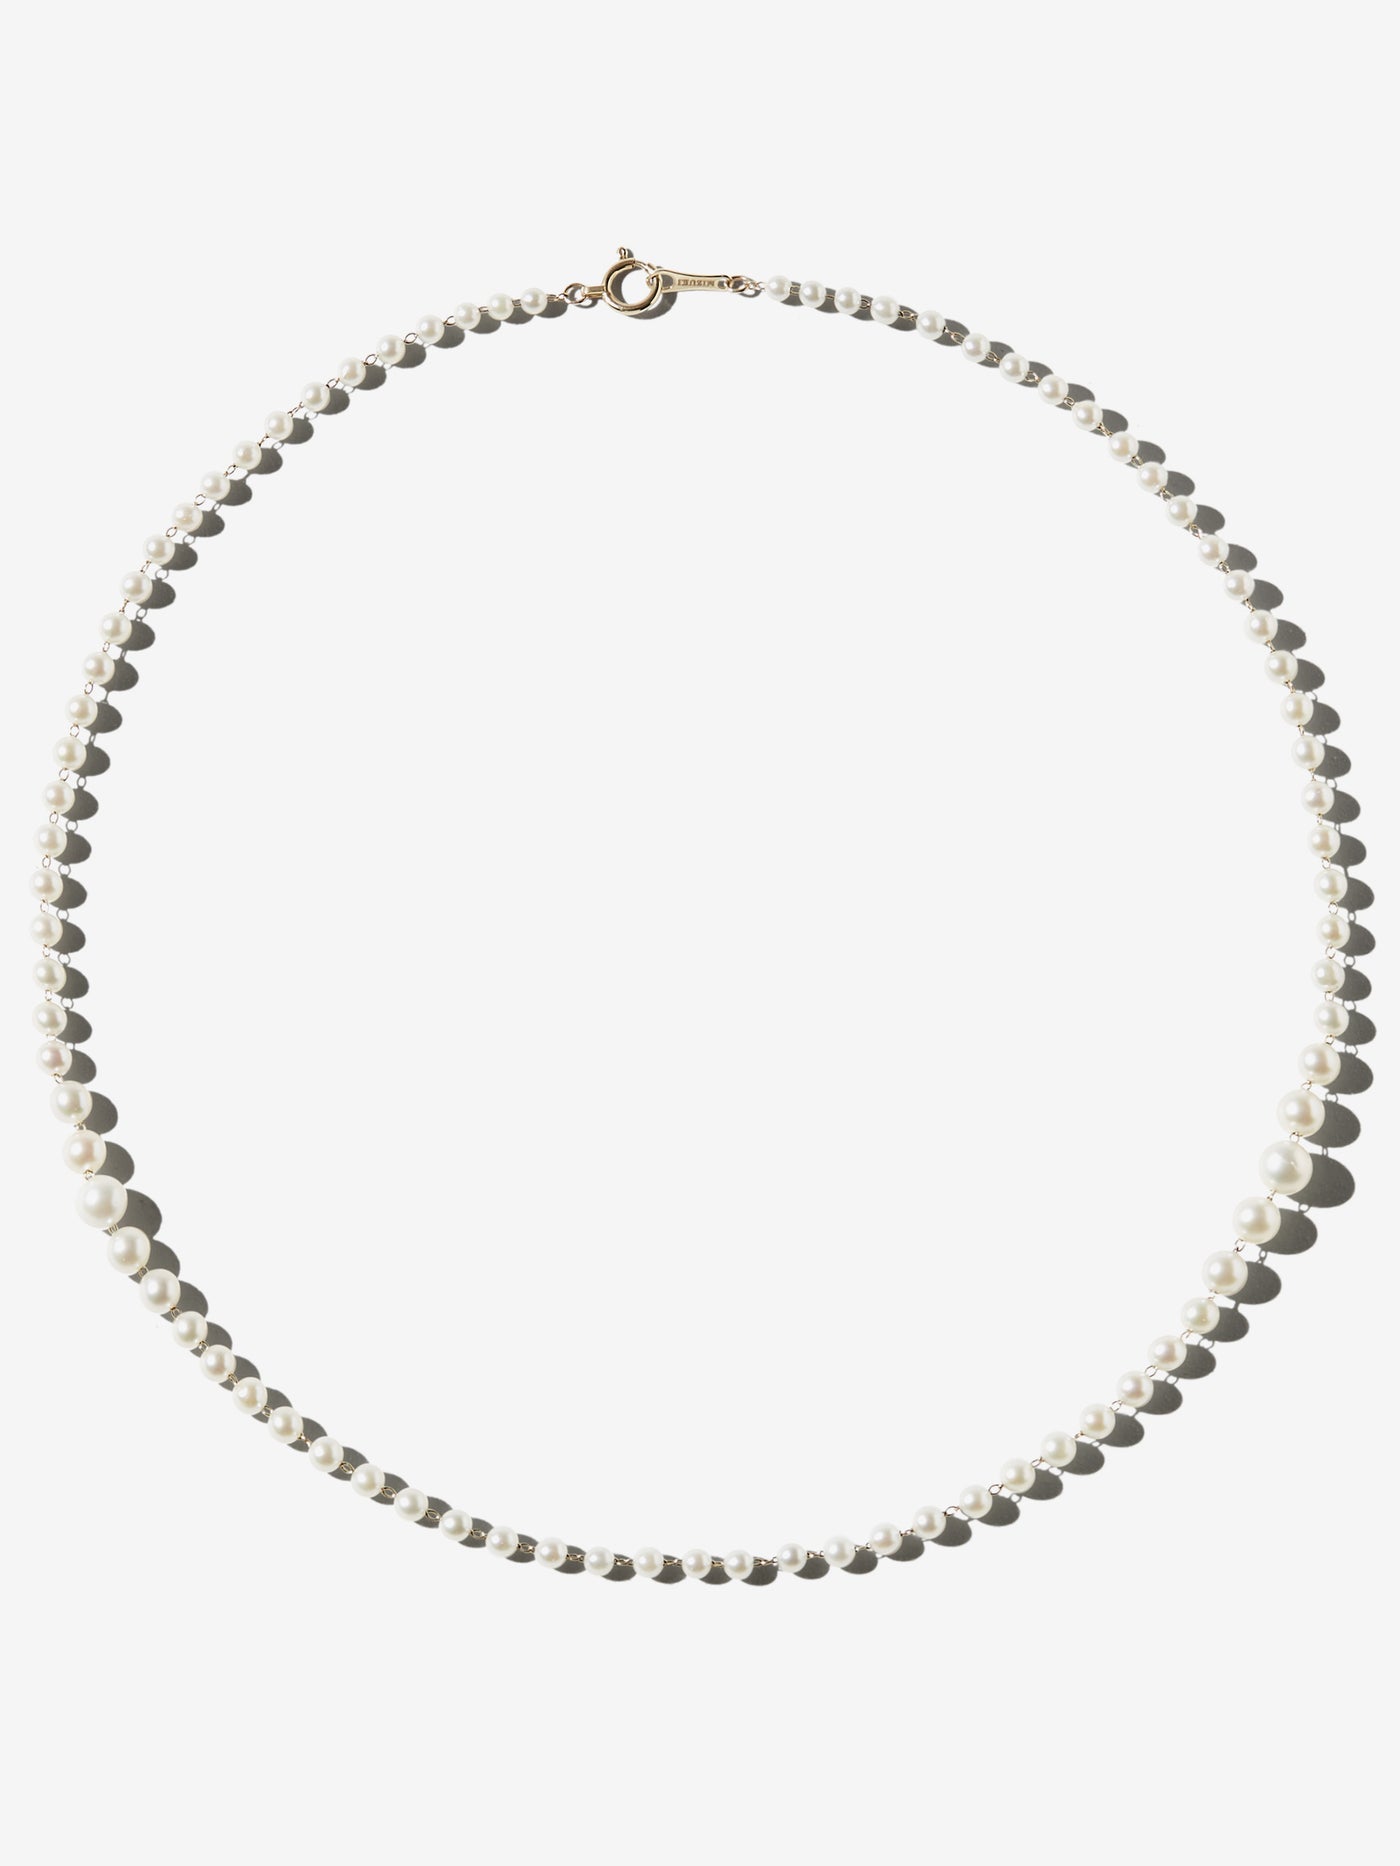 Dual Cascading Pearl Necklace